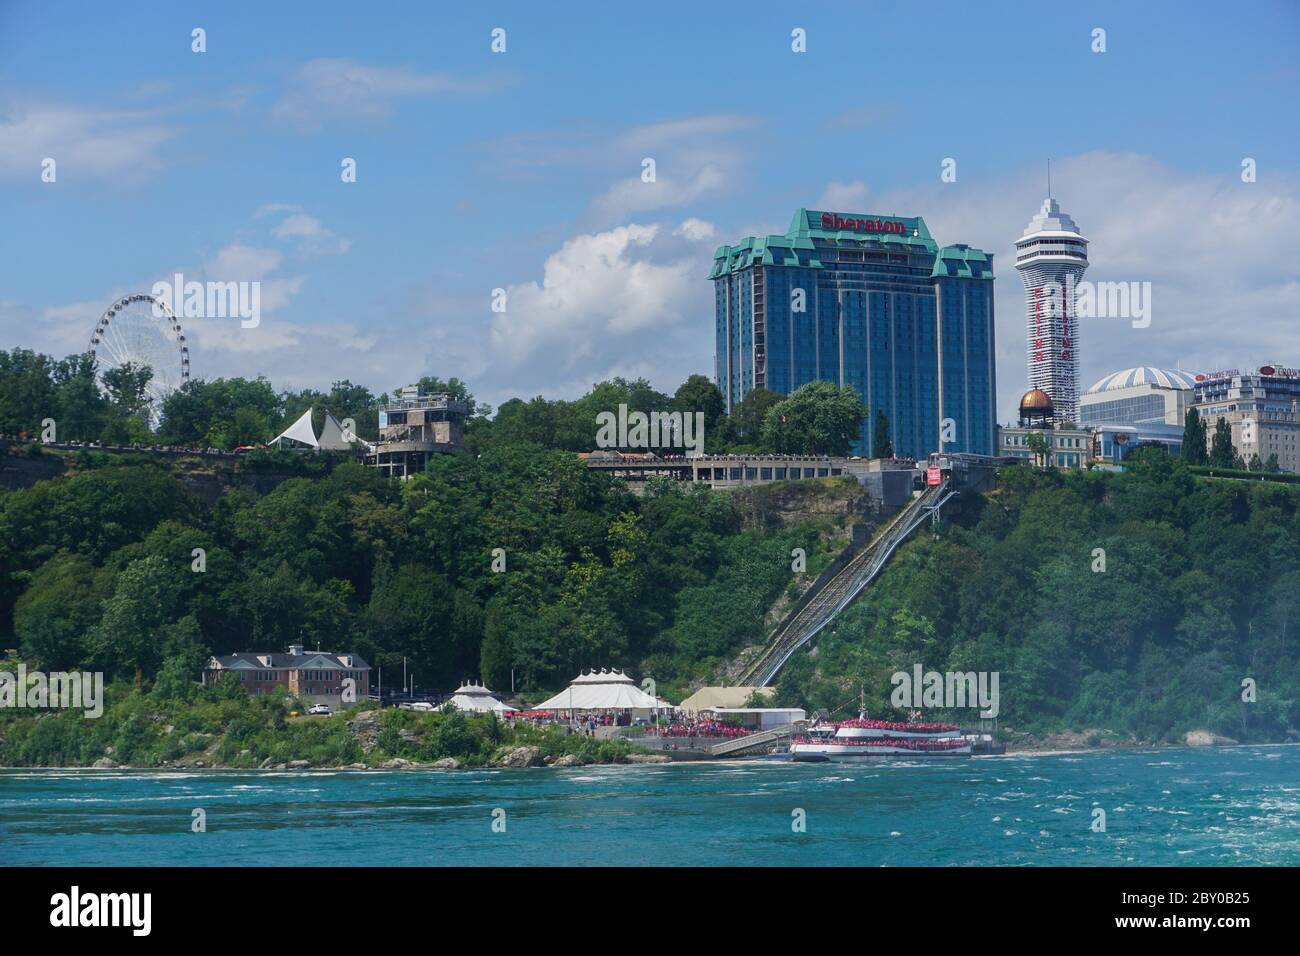 Niagara Falls, New York: Passengers fill tour boats to get a close-up view of the Falls, with the Canadian city of the same name in the background. Stock Photo